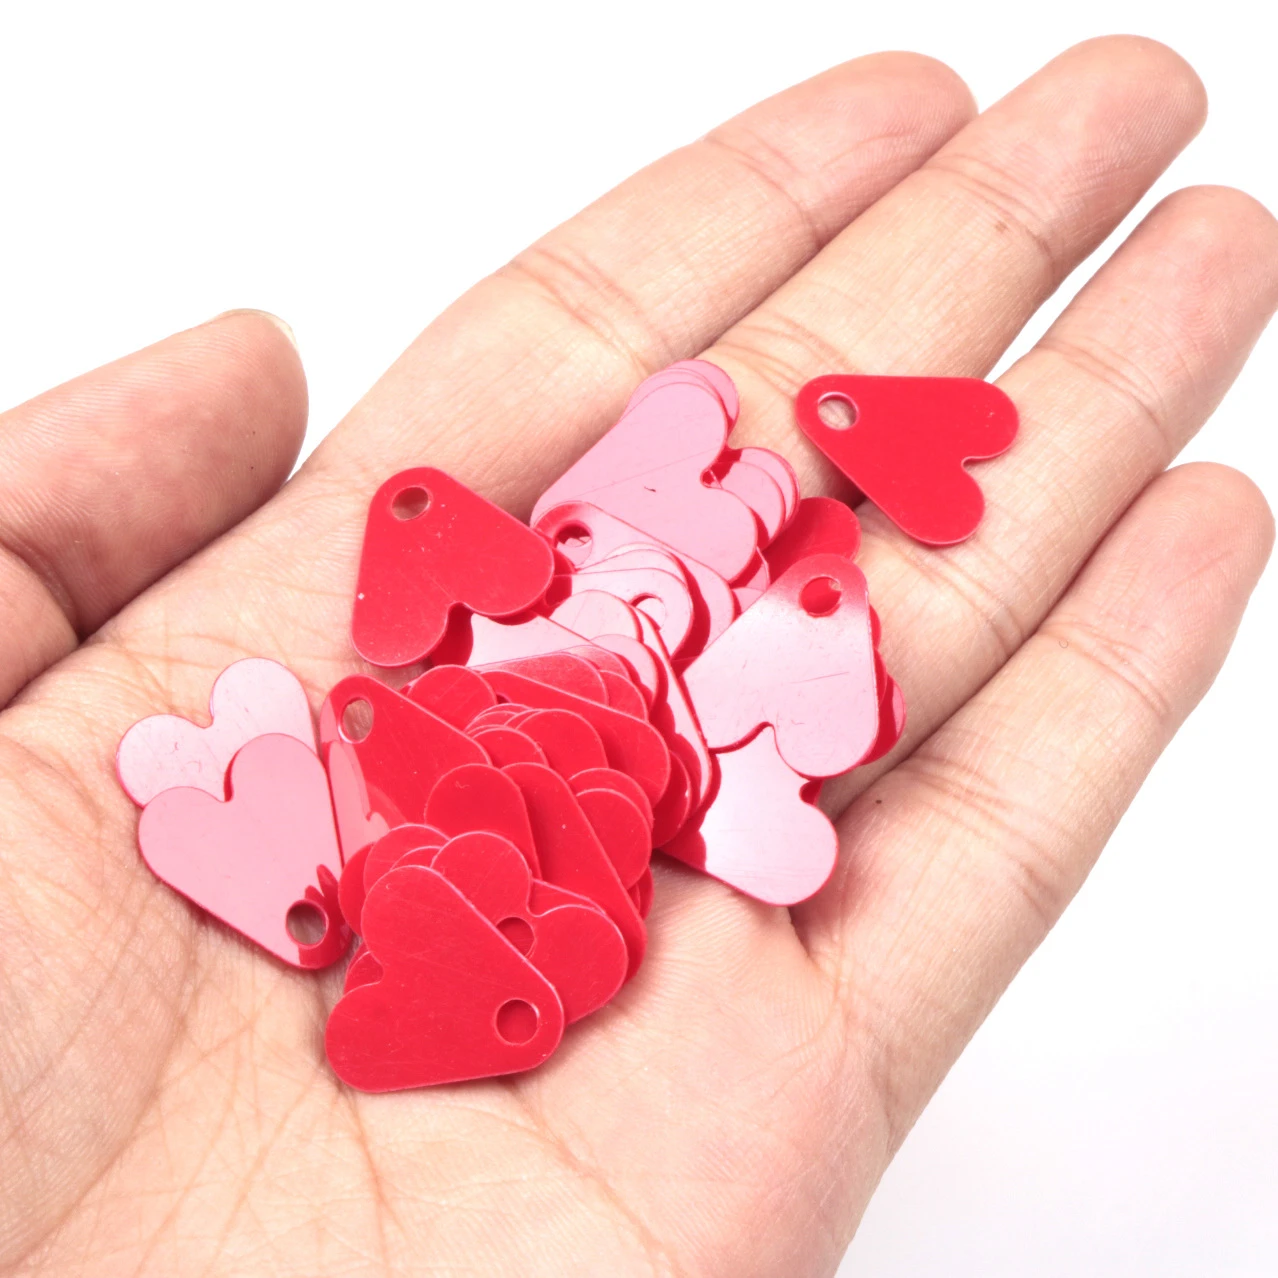 100Pcs Plastic Red Heart Shape Sequin Accessory 15/17/21mm For Bait Spoon Fishing Lure Hook Tail DIY Fishing Lure Accessories